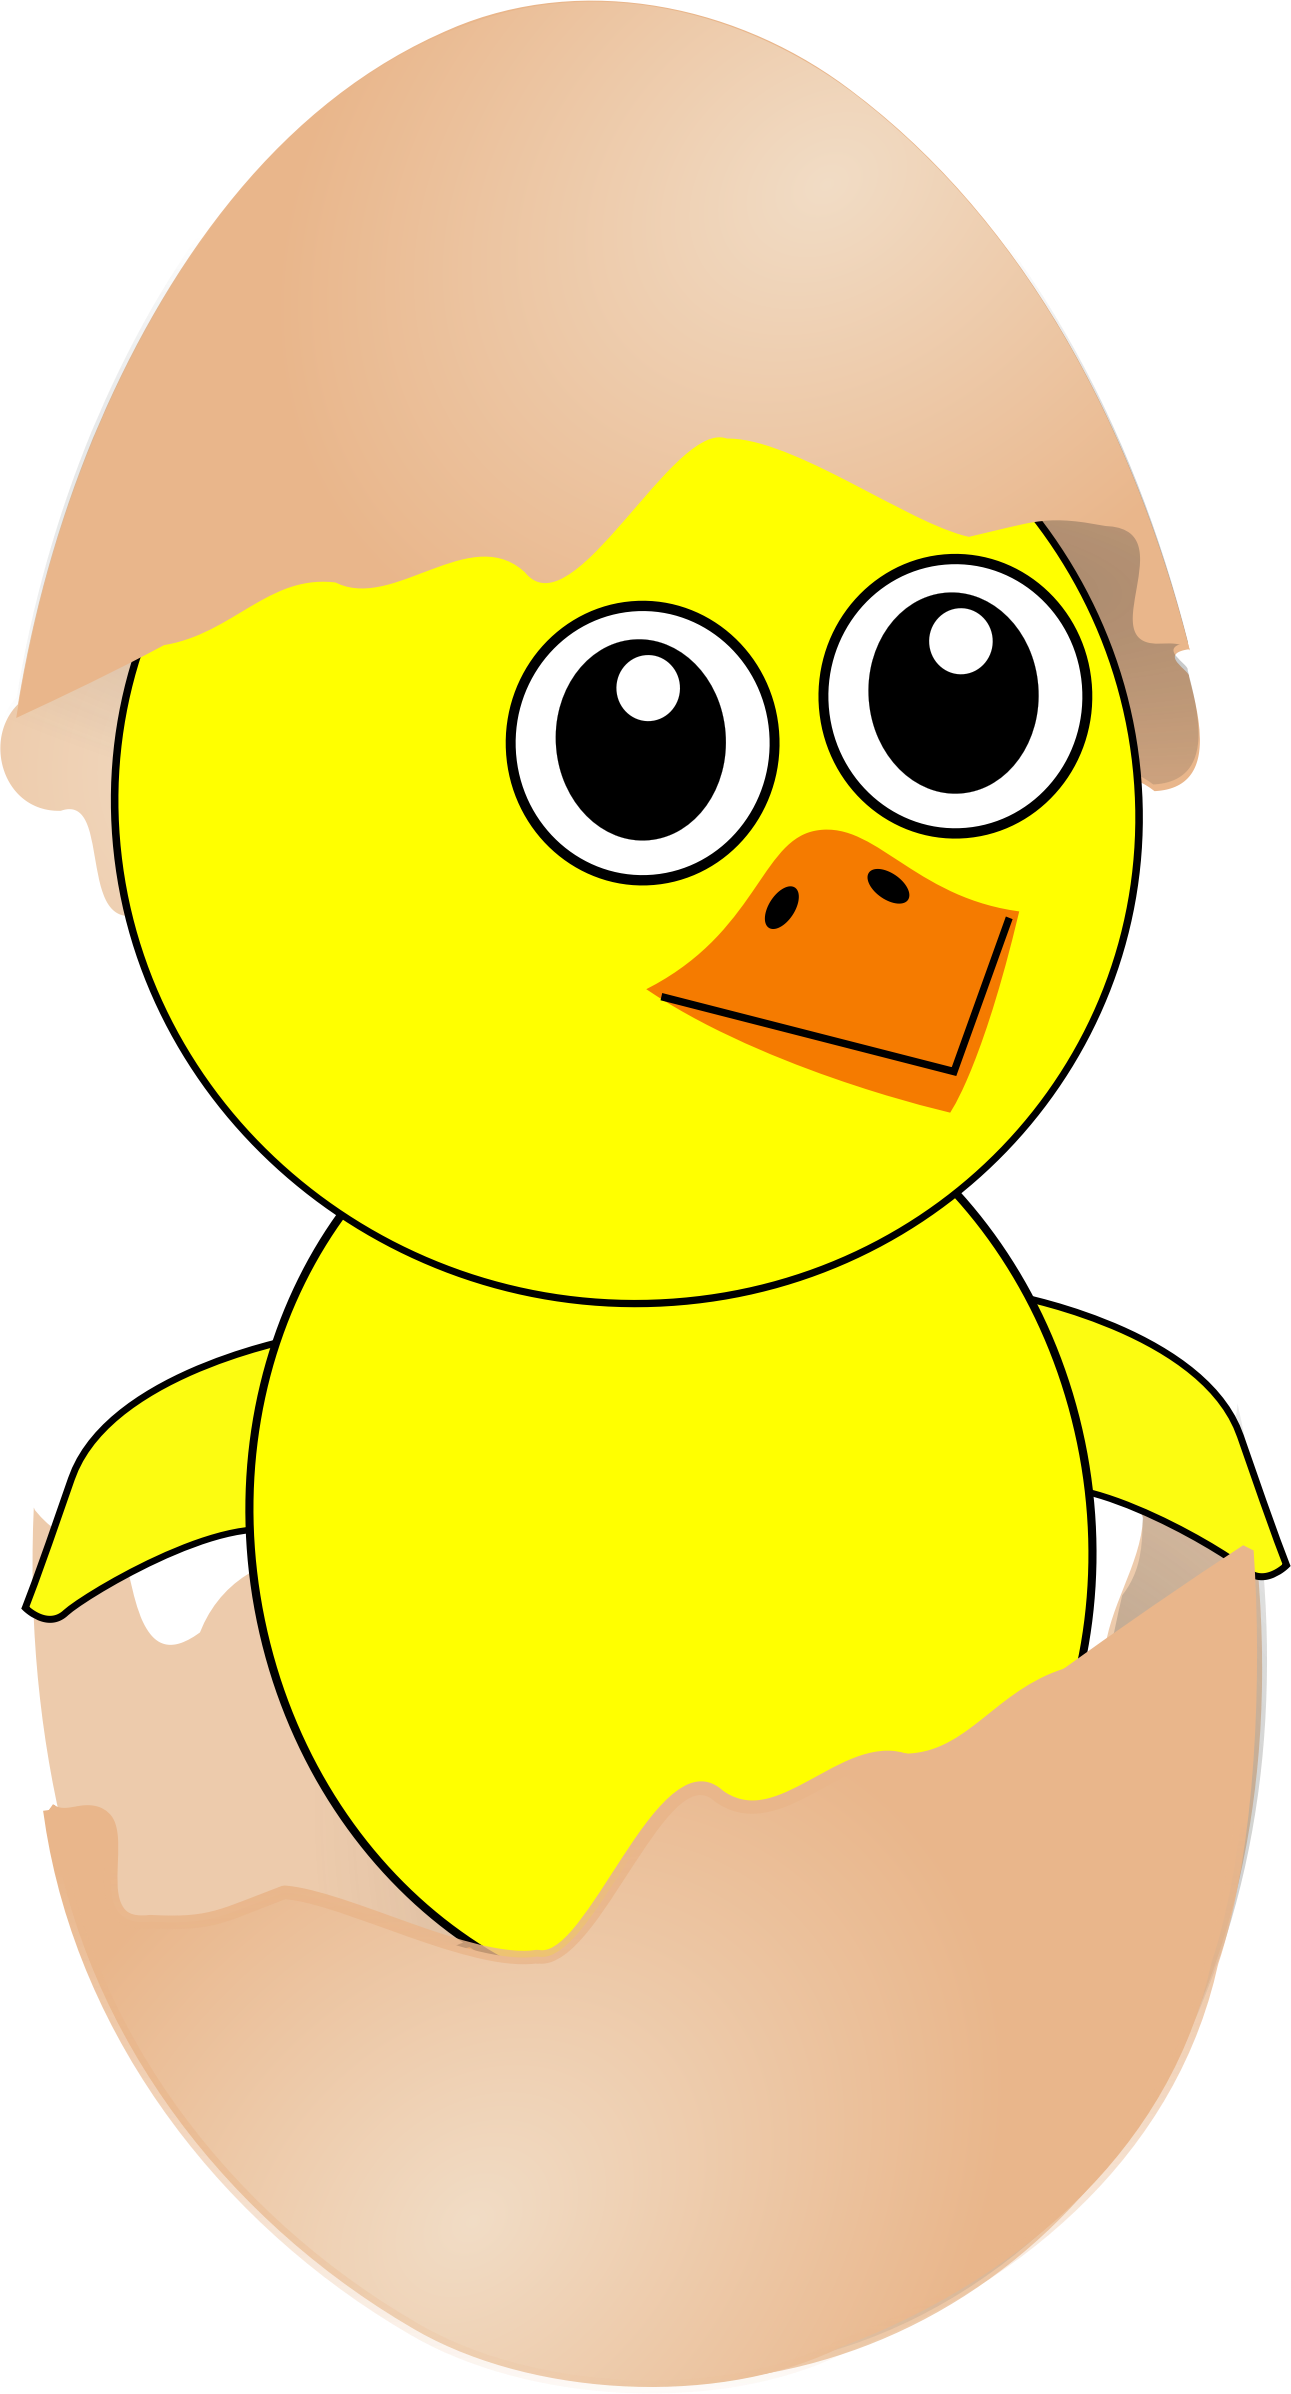 clipart baby chick - photo #41